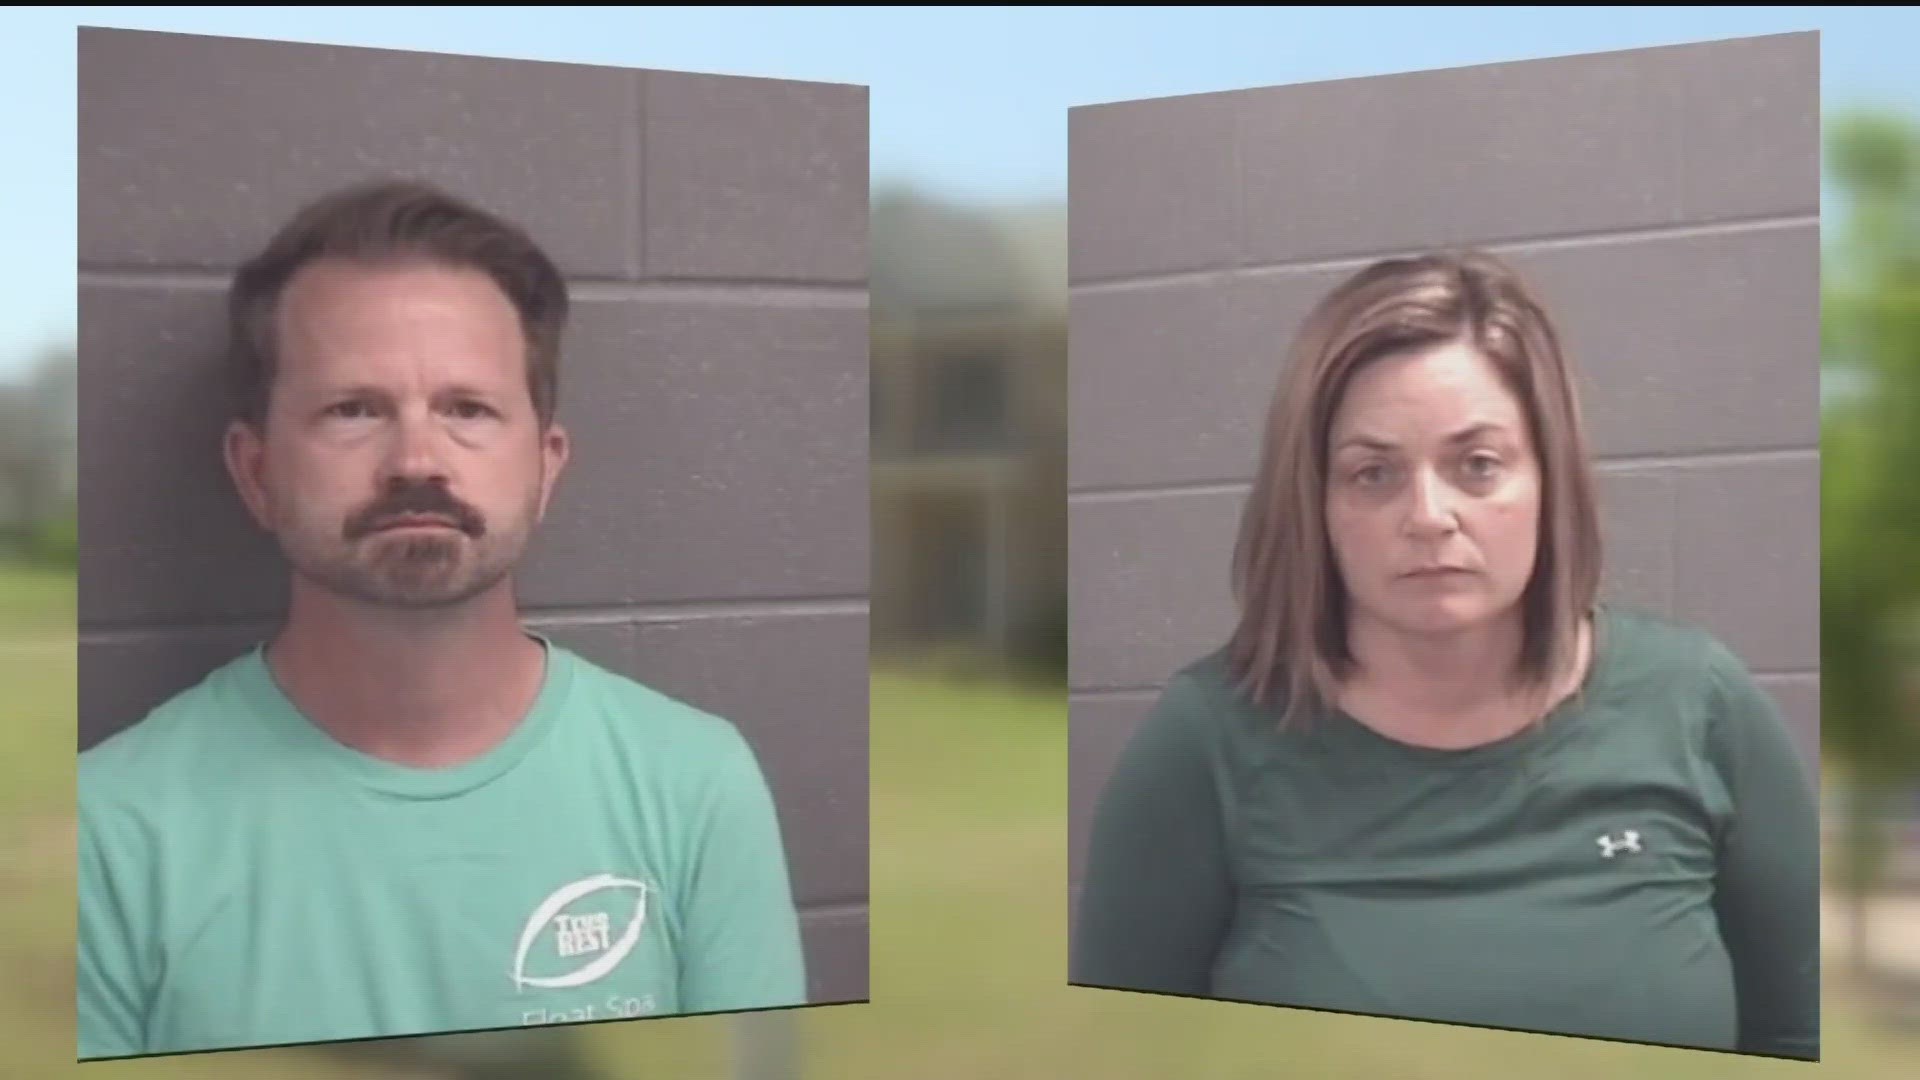 The parents, Tyler and Krista Schindley, are accused of withholding food and medical treatment for their young son.